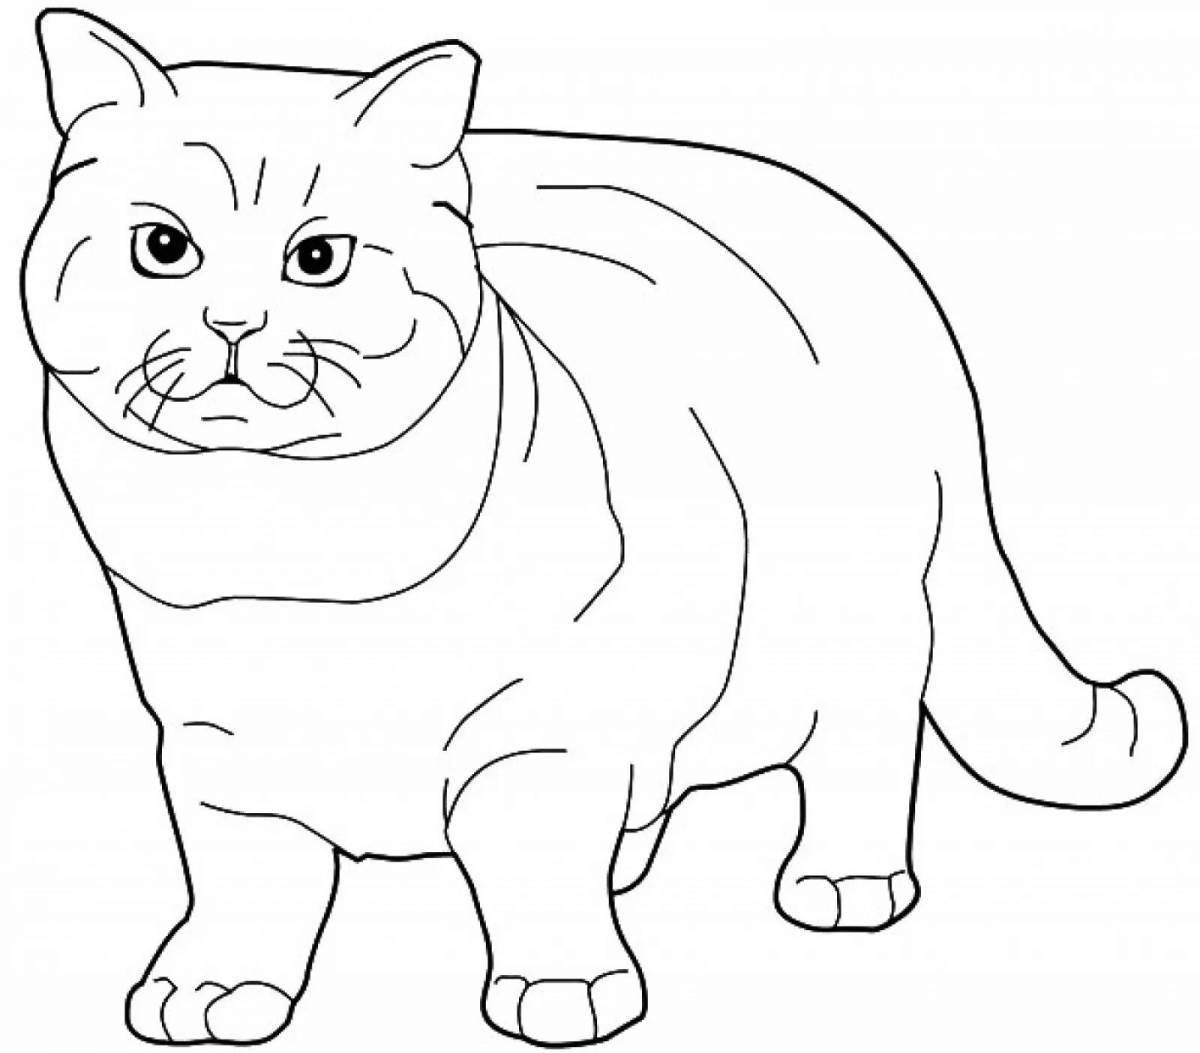 Coloring page cute scottish fold kittens